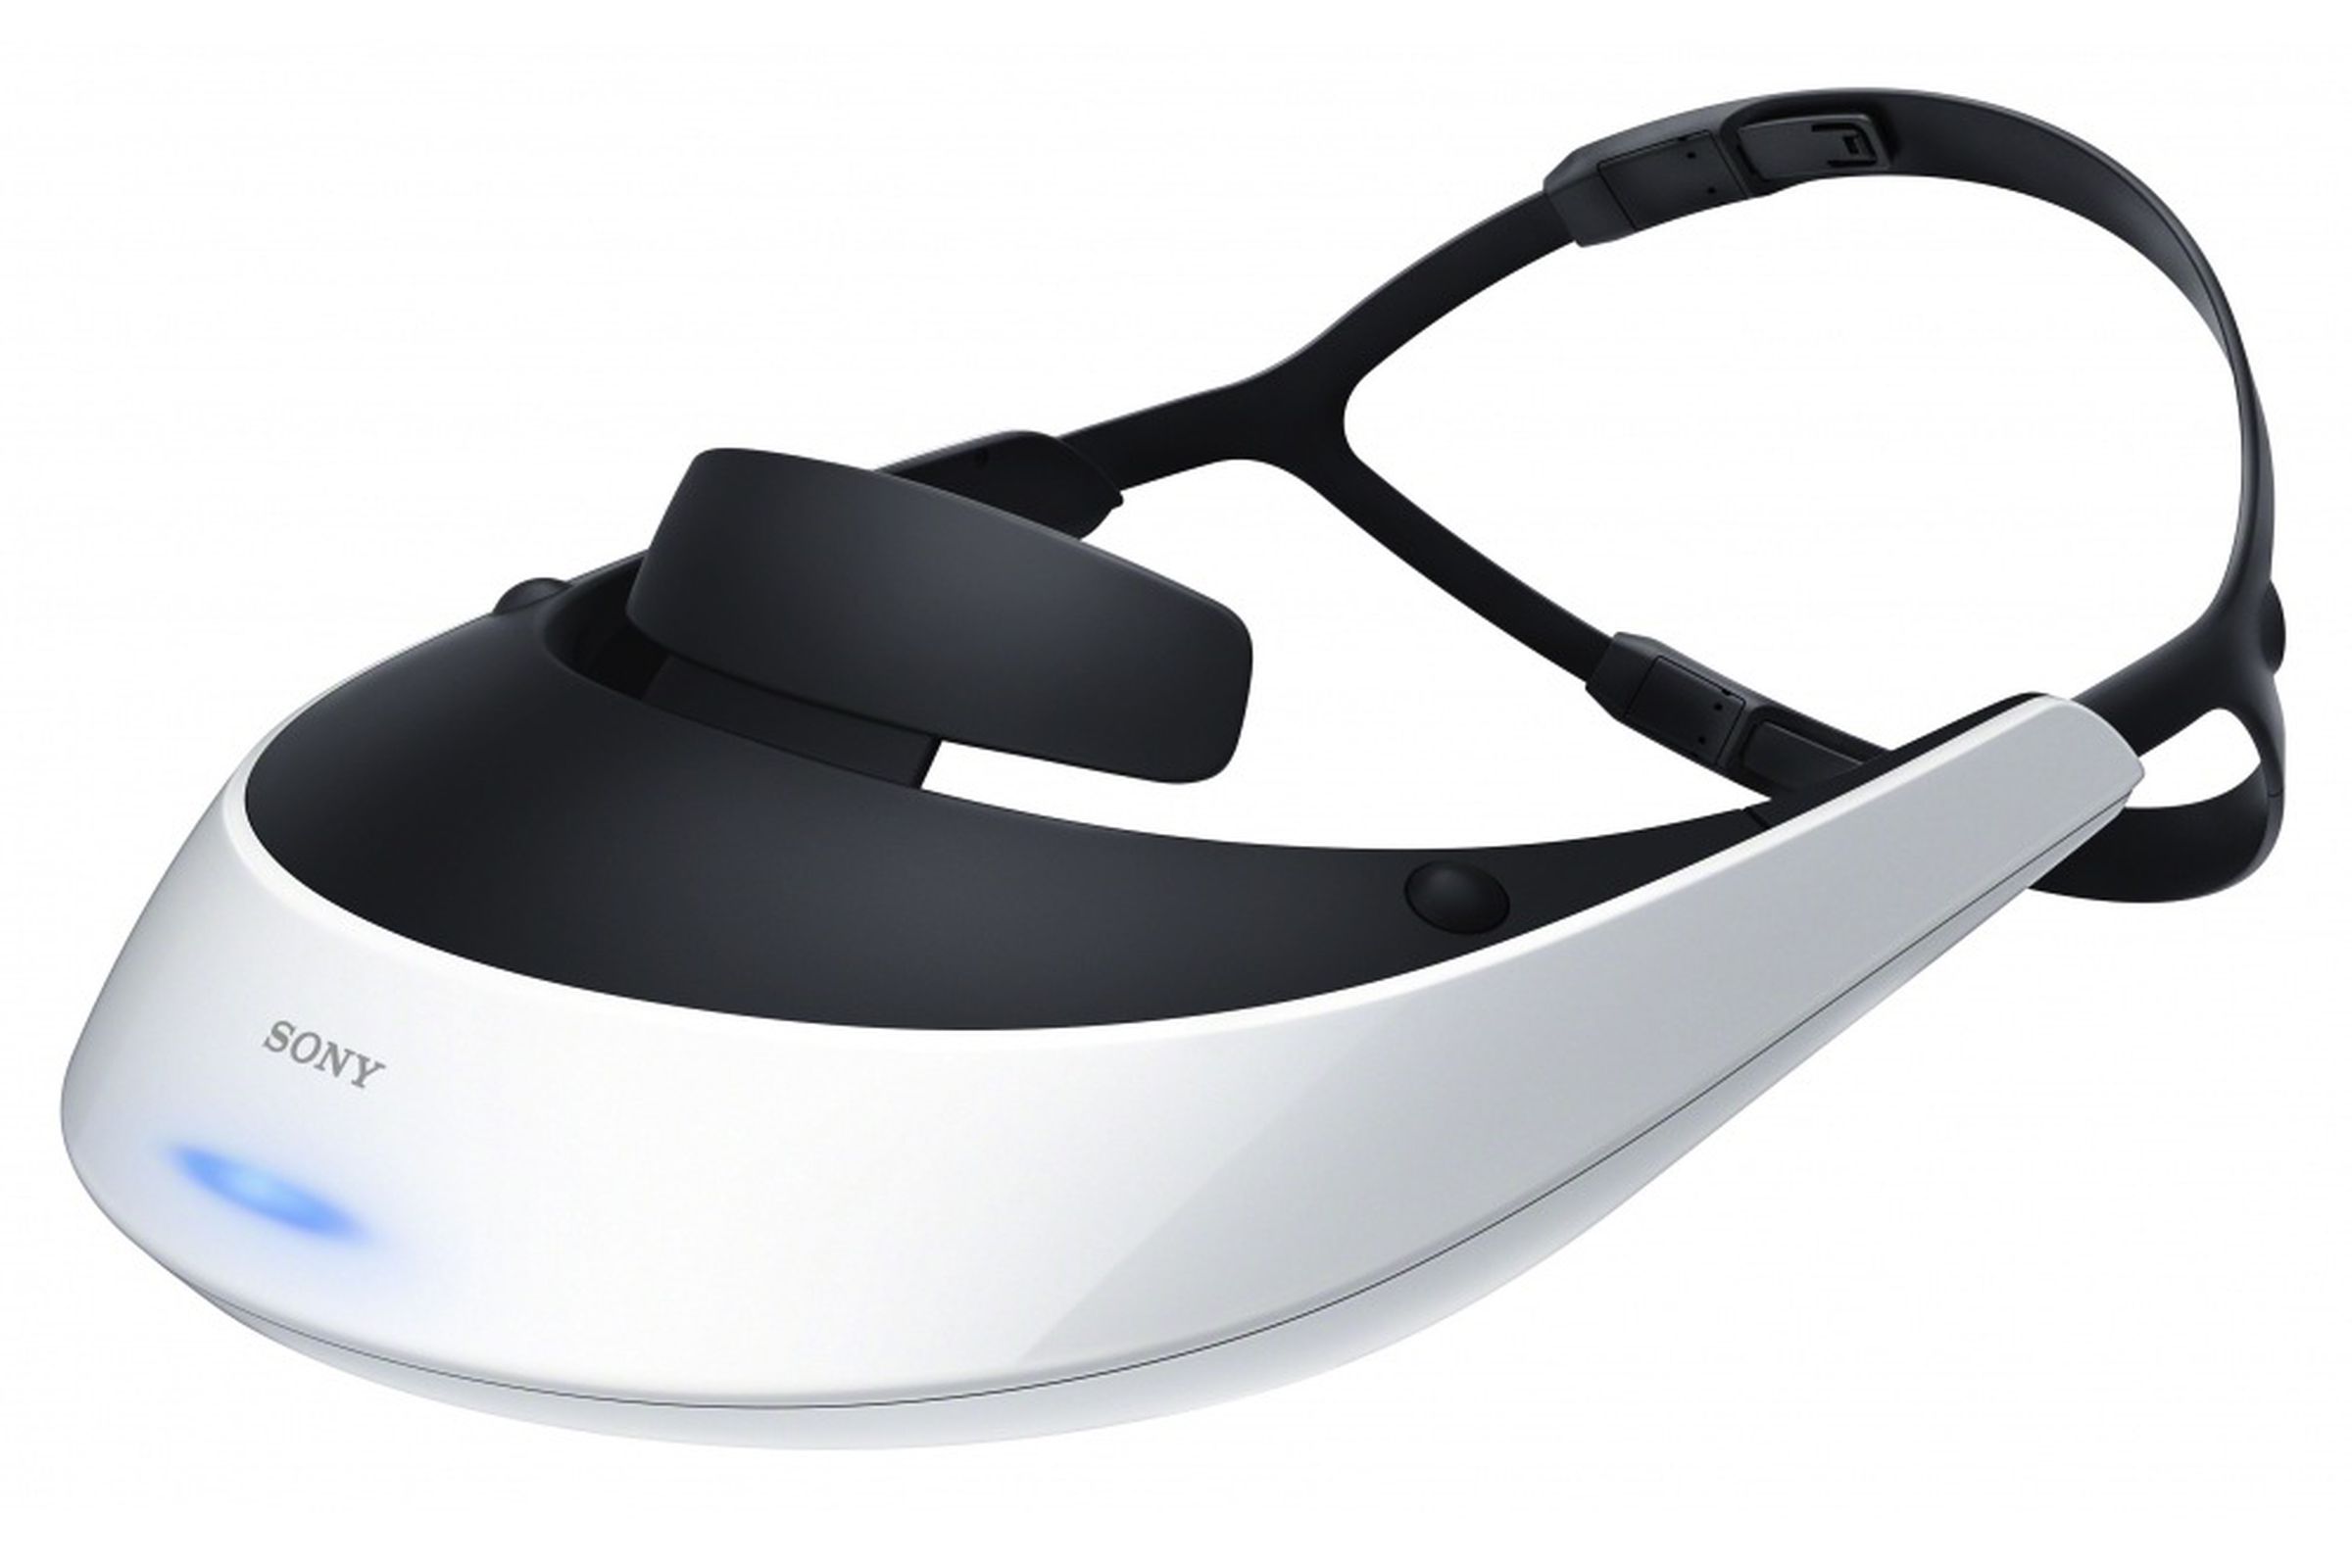 Sony HMZ-T2 Personal 3D Viewer